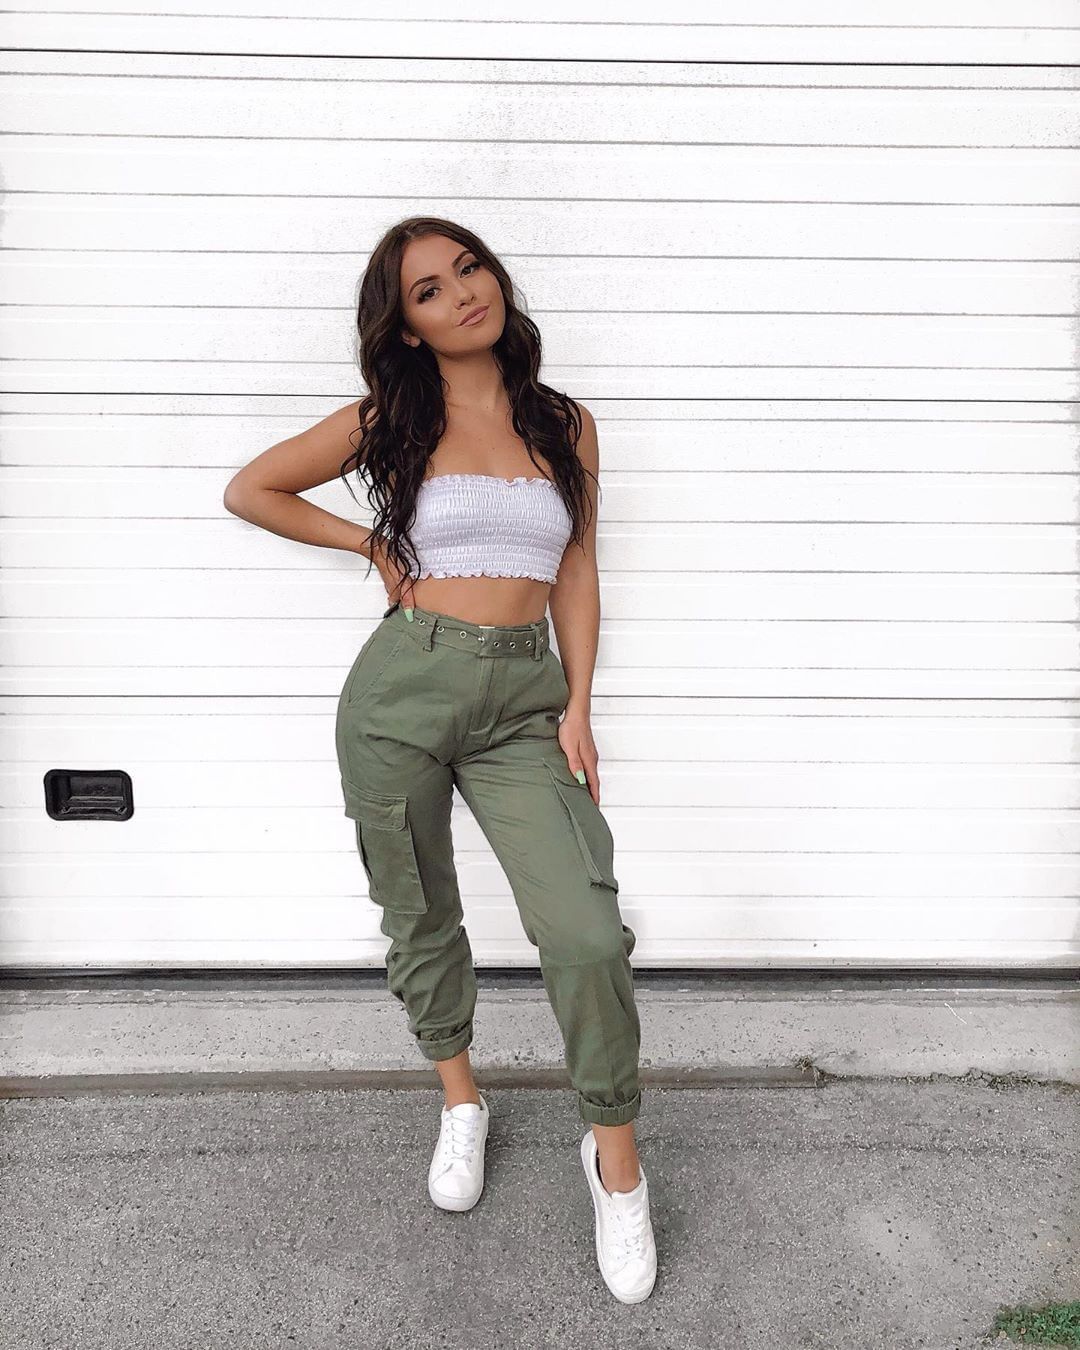 Cargo Sweatpants, Crop Top And White
Sneakers Outfit